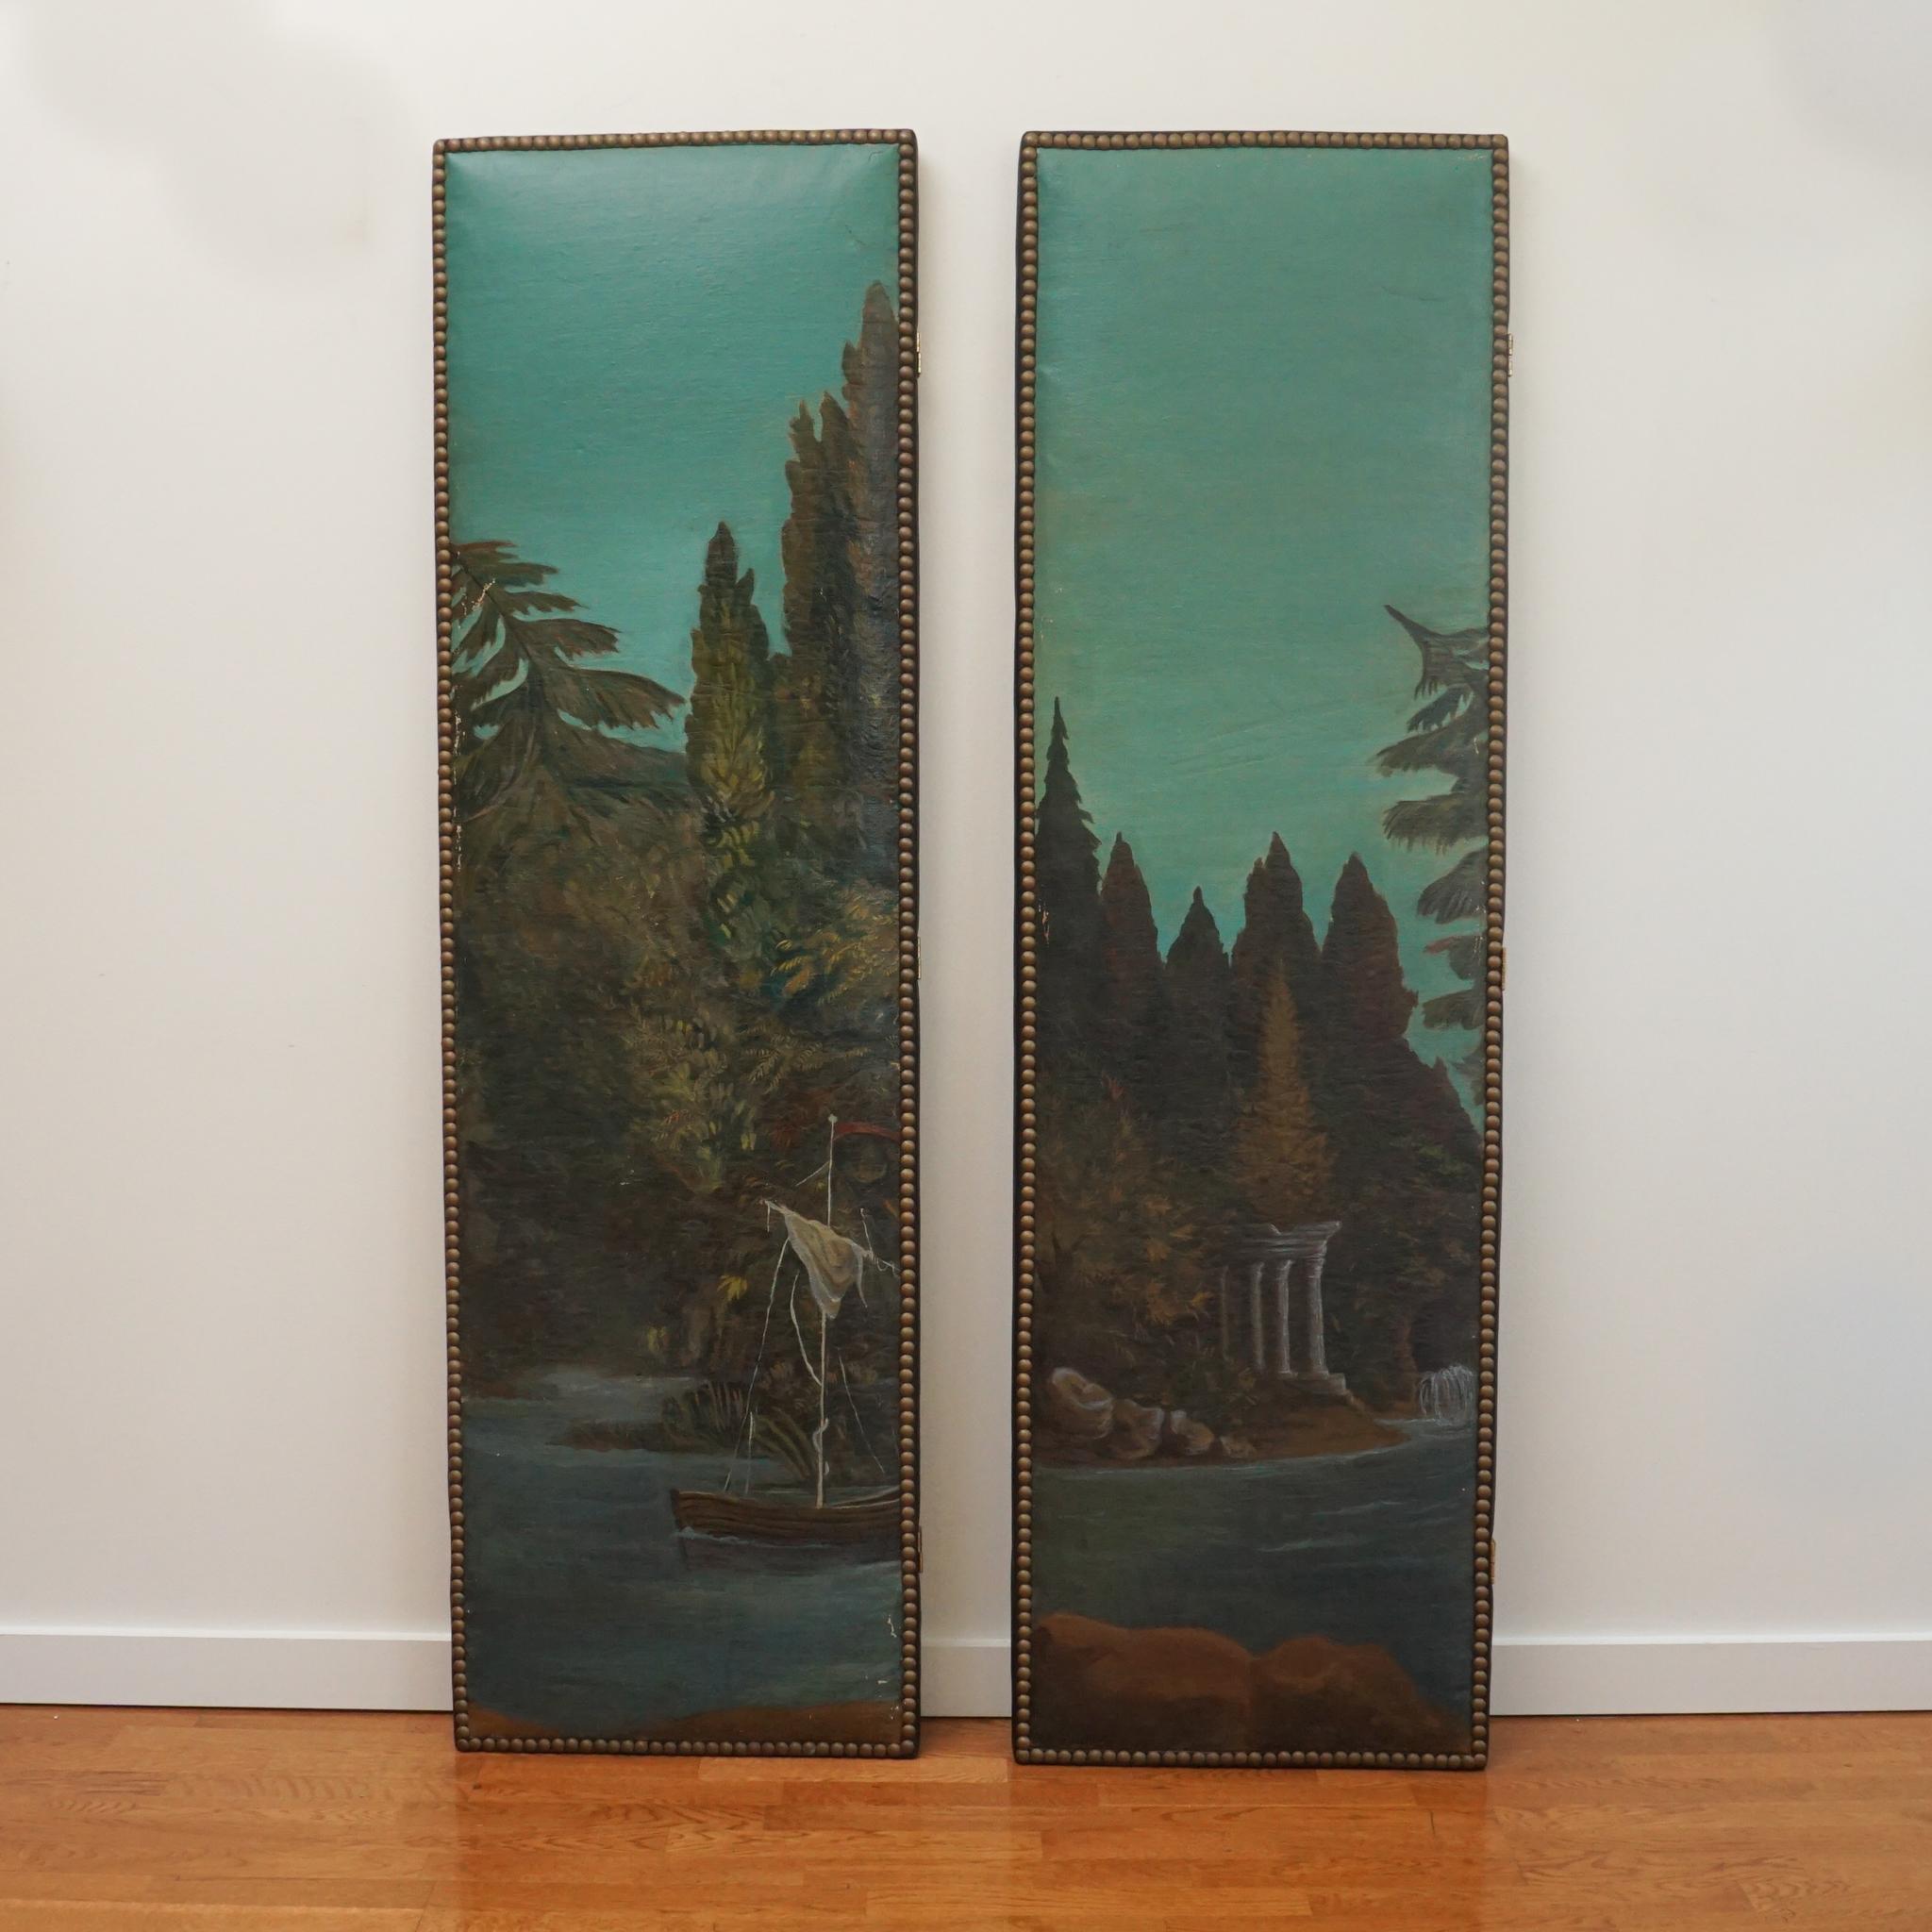 The pair of vintage painted canvas panels, shown here, are notable for their beauty and condition. Depicting a bucolic outdoor scene, the imagery has maintained good color over time. Each panel is mounted on a wood board and outlined with a nail